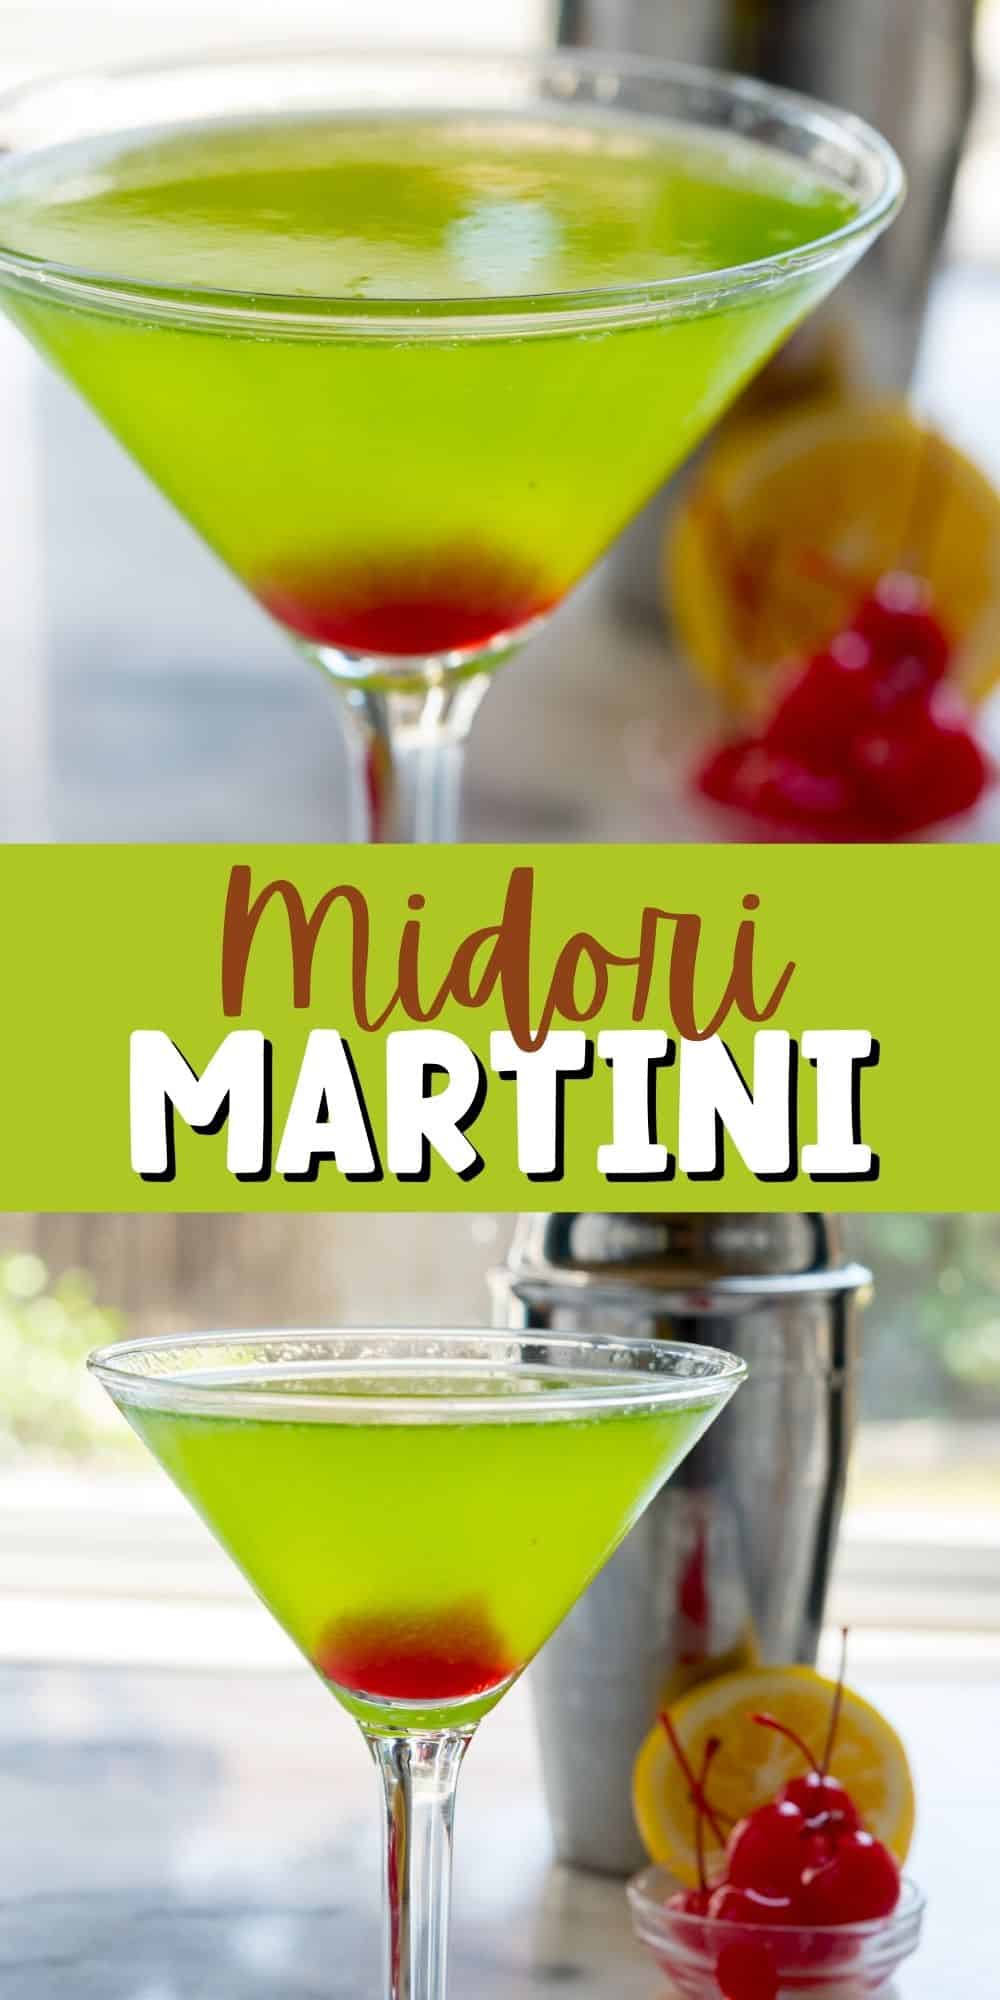 two photos green martini with red at the bottom in a clear glass and words in the middle